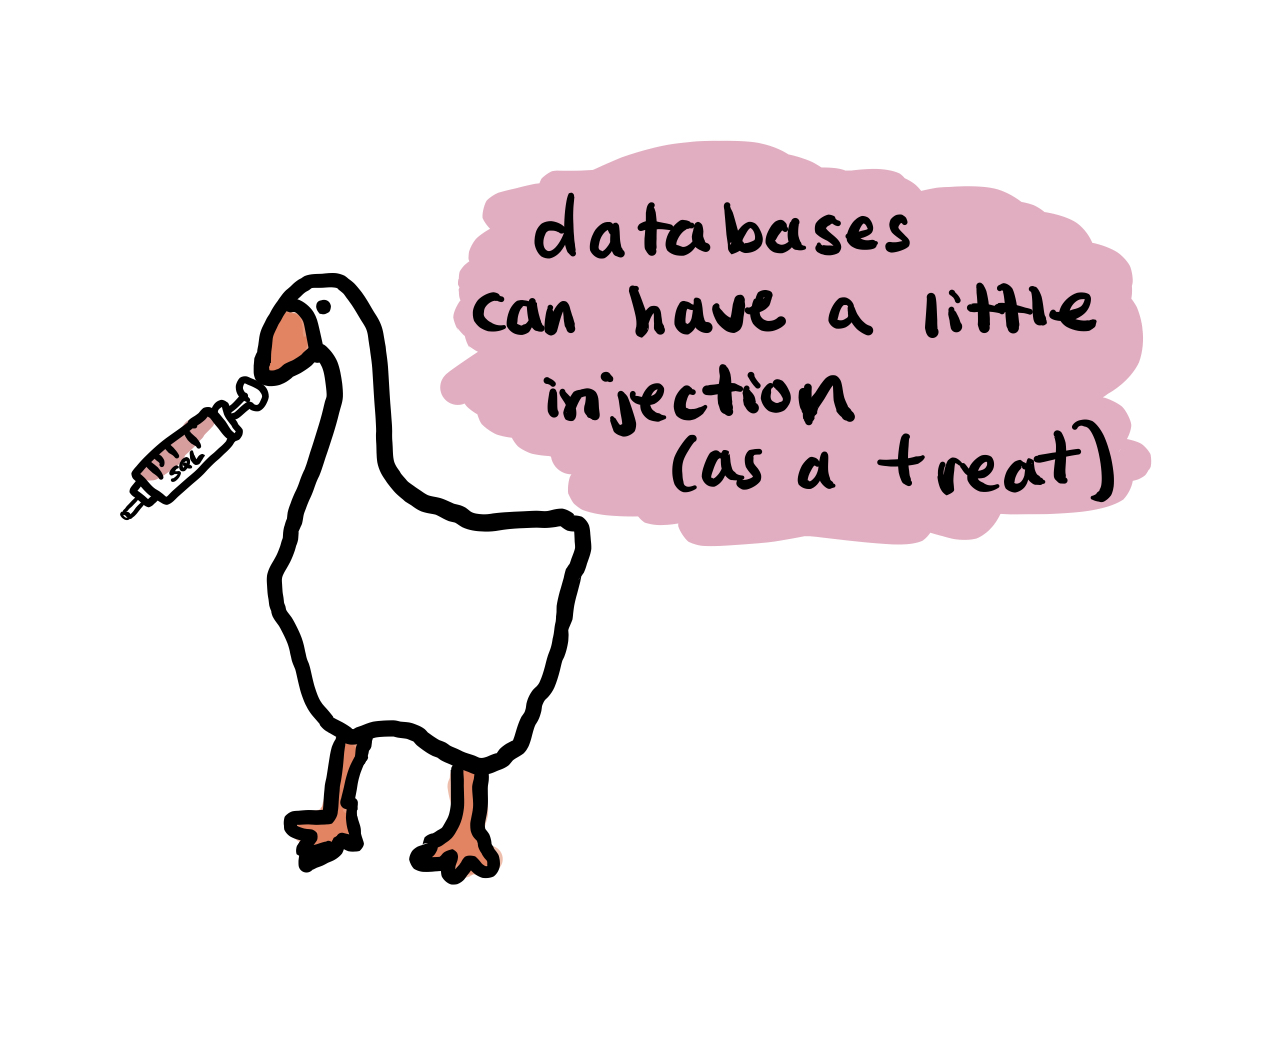 Image of a goose saying databases can have a little injection as a treat